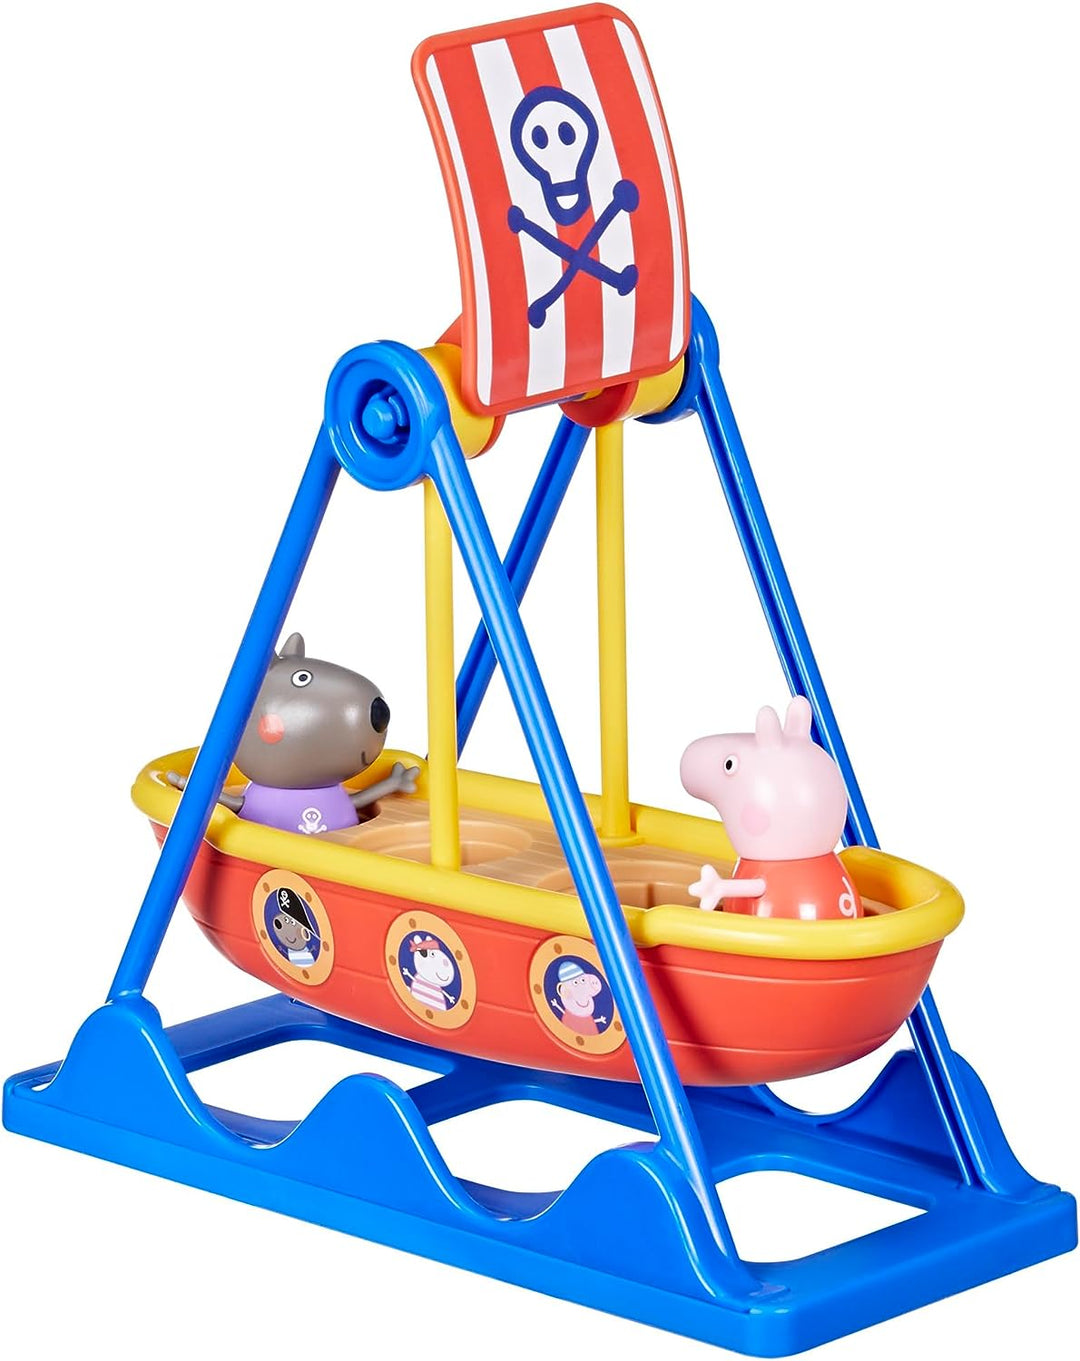 Peppa Pig Toys Peppa's Pirate Ride Playset with 2 Figures, Kids Toys